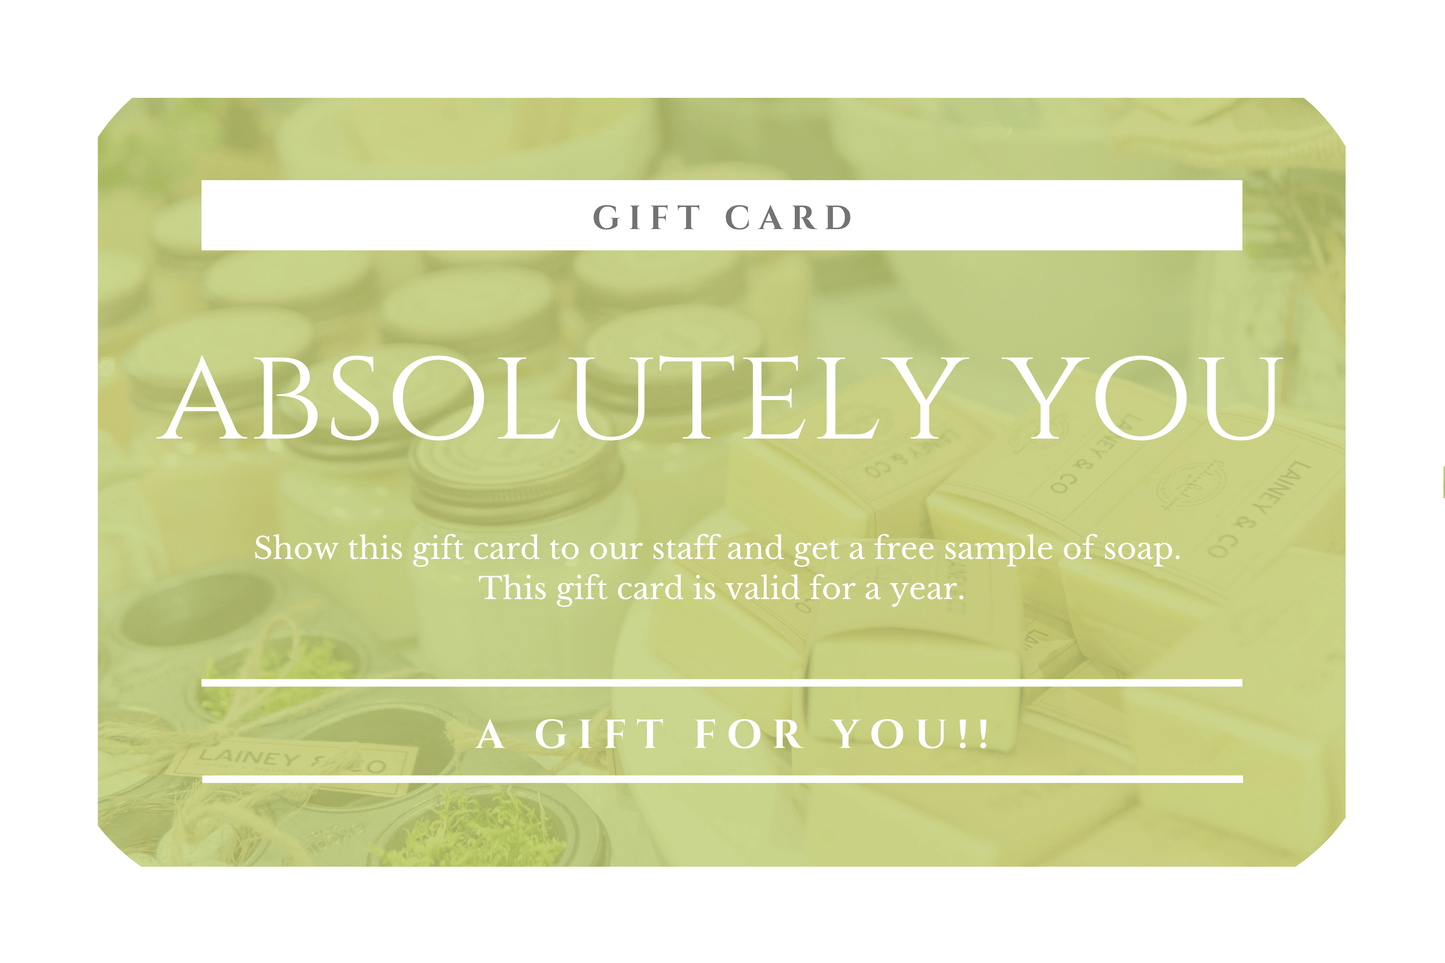 Absolutely You by LS Gift Cards